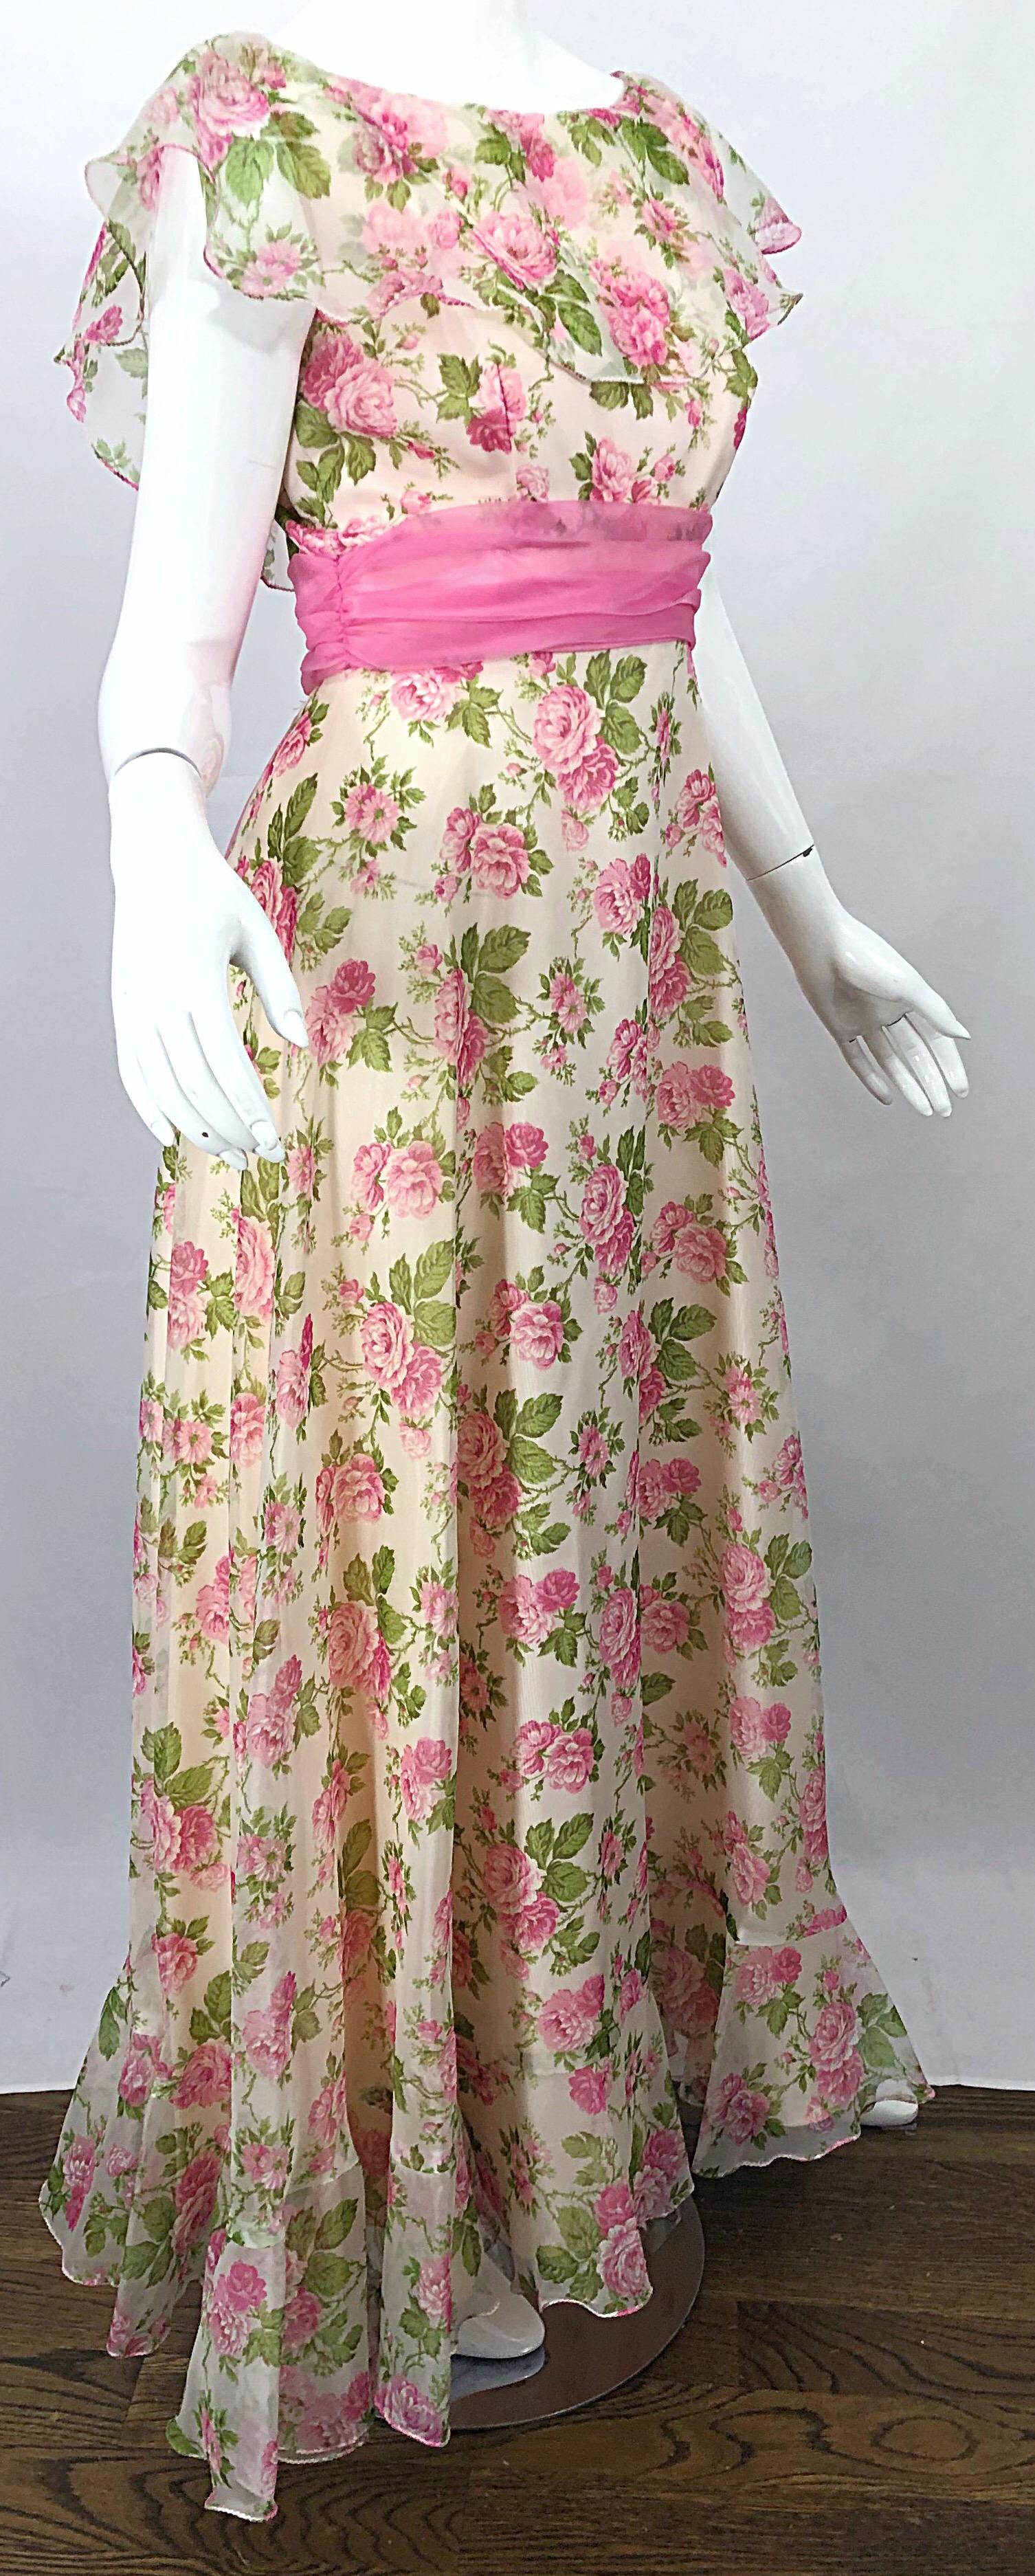 Sylvia Ann 1970s Rose Print Pink Ivory Chiffon Vintage 70s Maxi Dress Gown In Excellent Condition For Sale In San Diego, CA